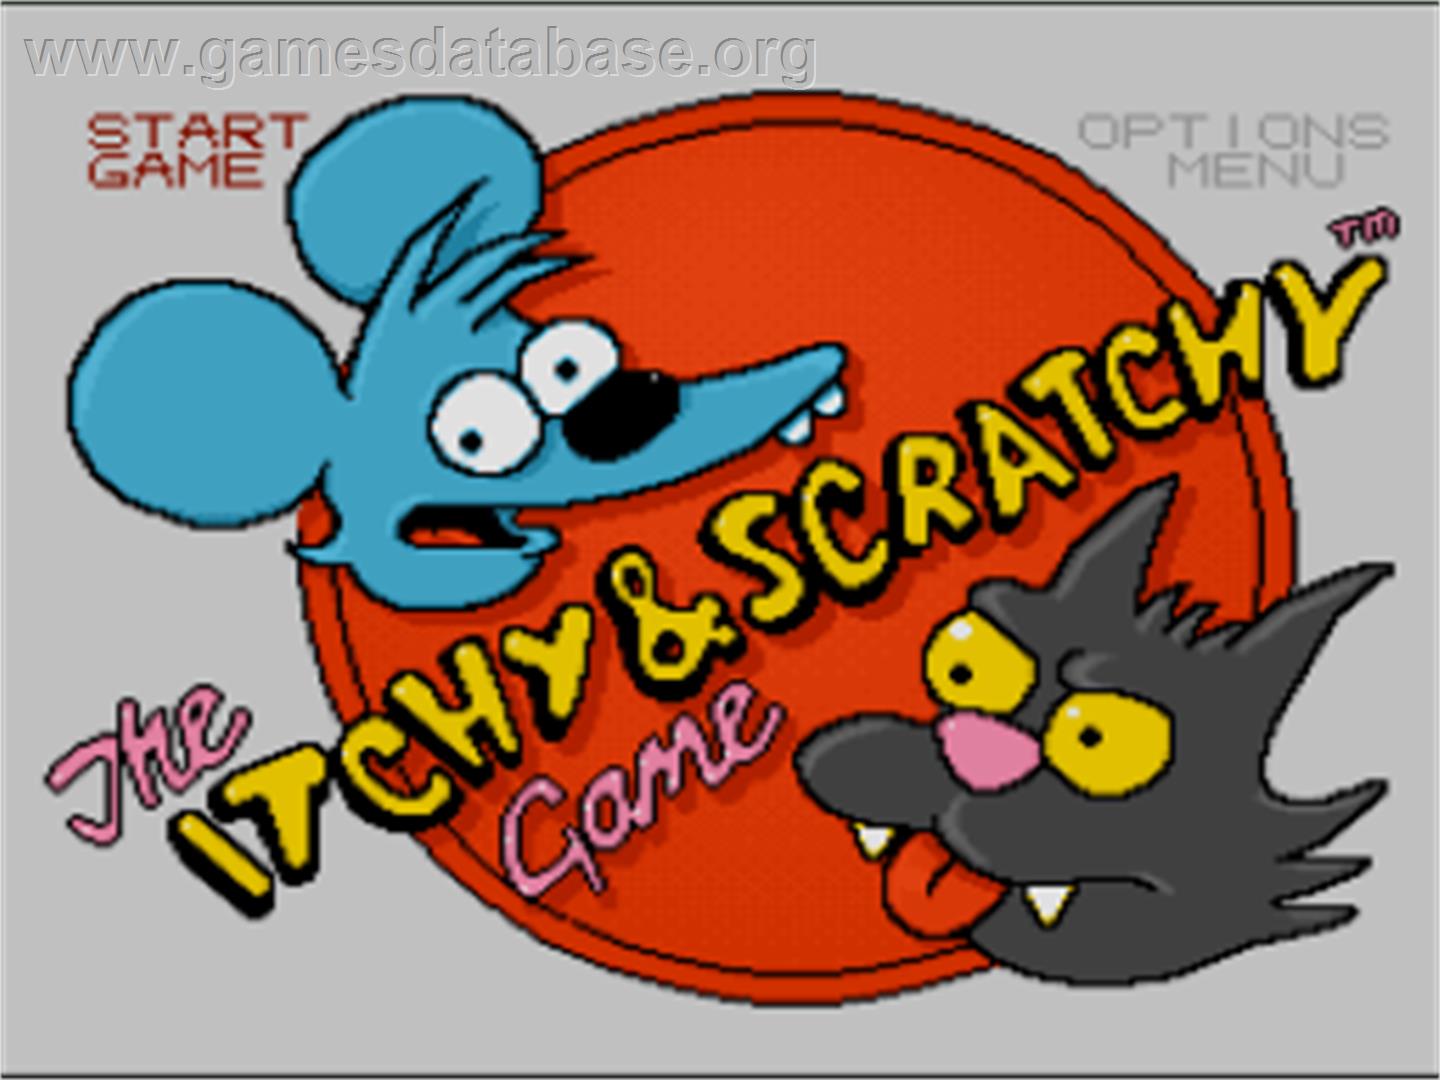 The Itchy & Scratchy Game - Nintendo SNES - Artwork - Title Screen